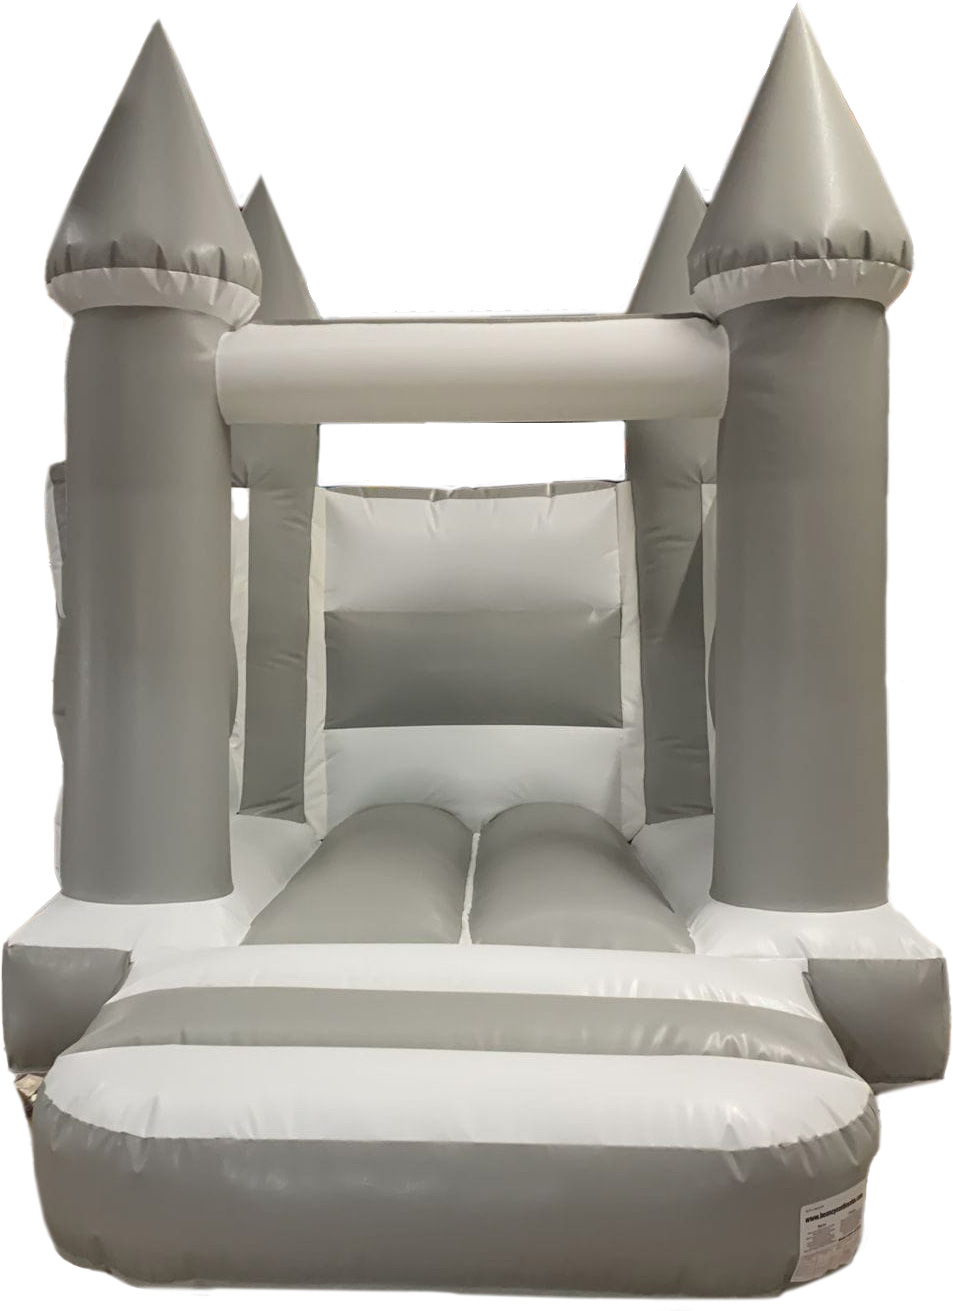 Bouncy Castle Sales - BC667 - Bouncy Inflatable for sale